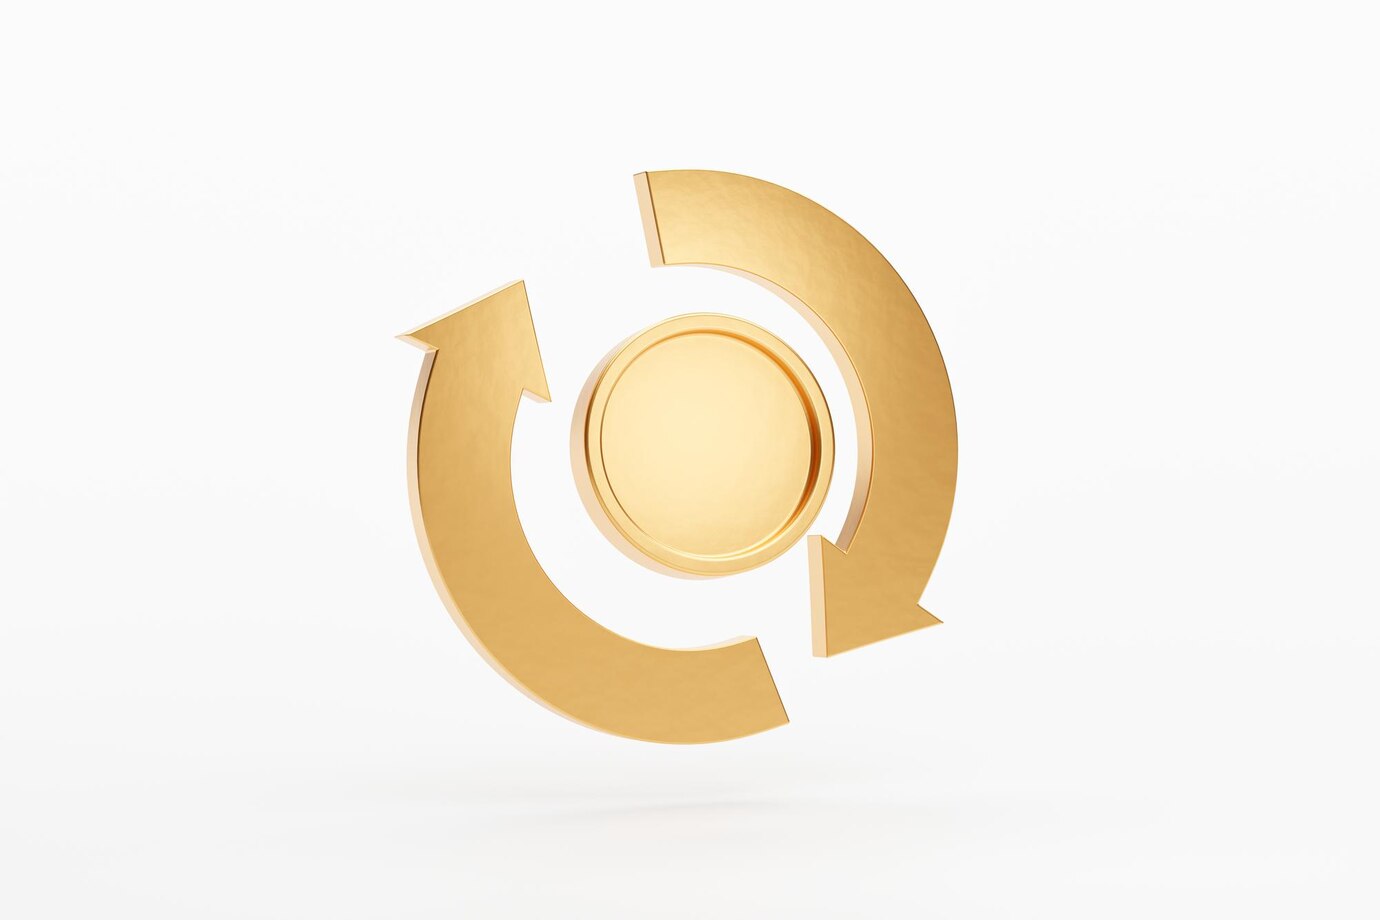 currency-exchange-gold-coin-currency-money-icon-sign-symbol-business